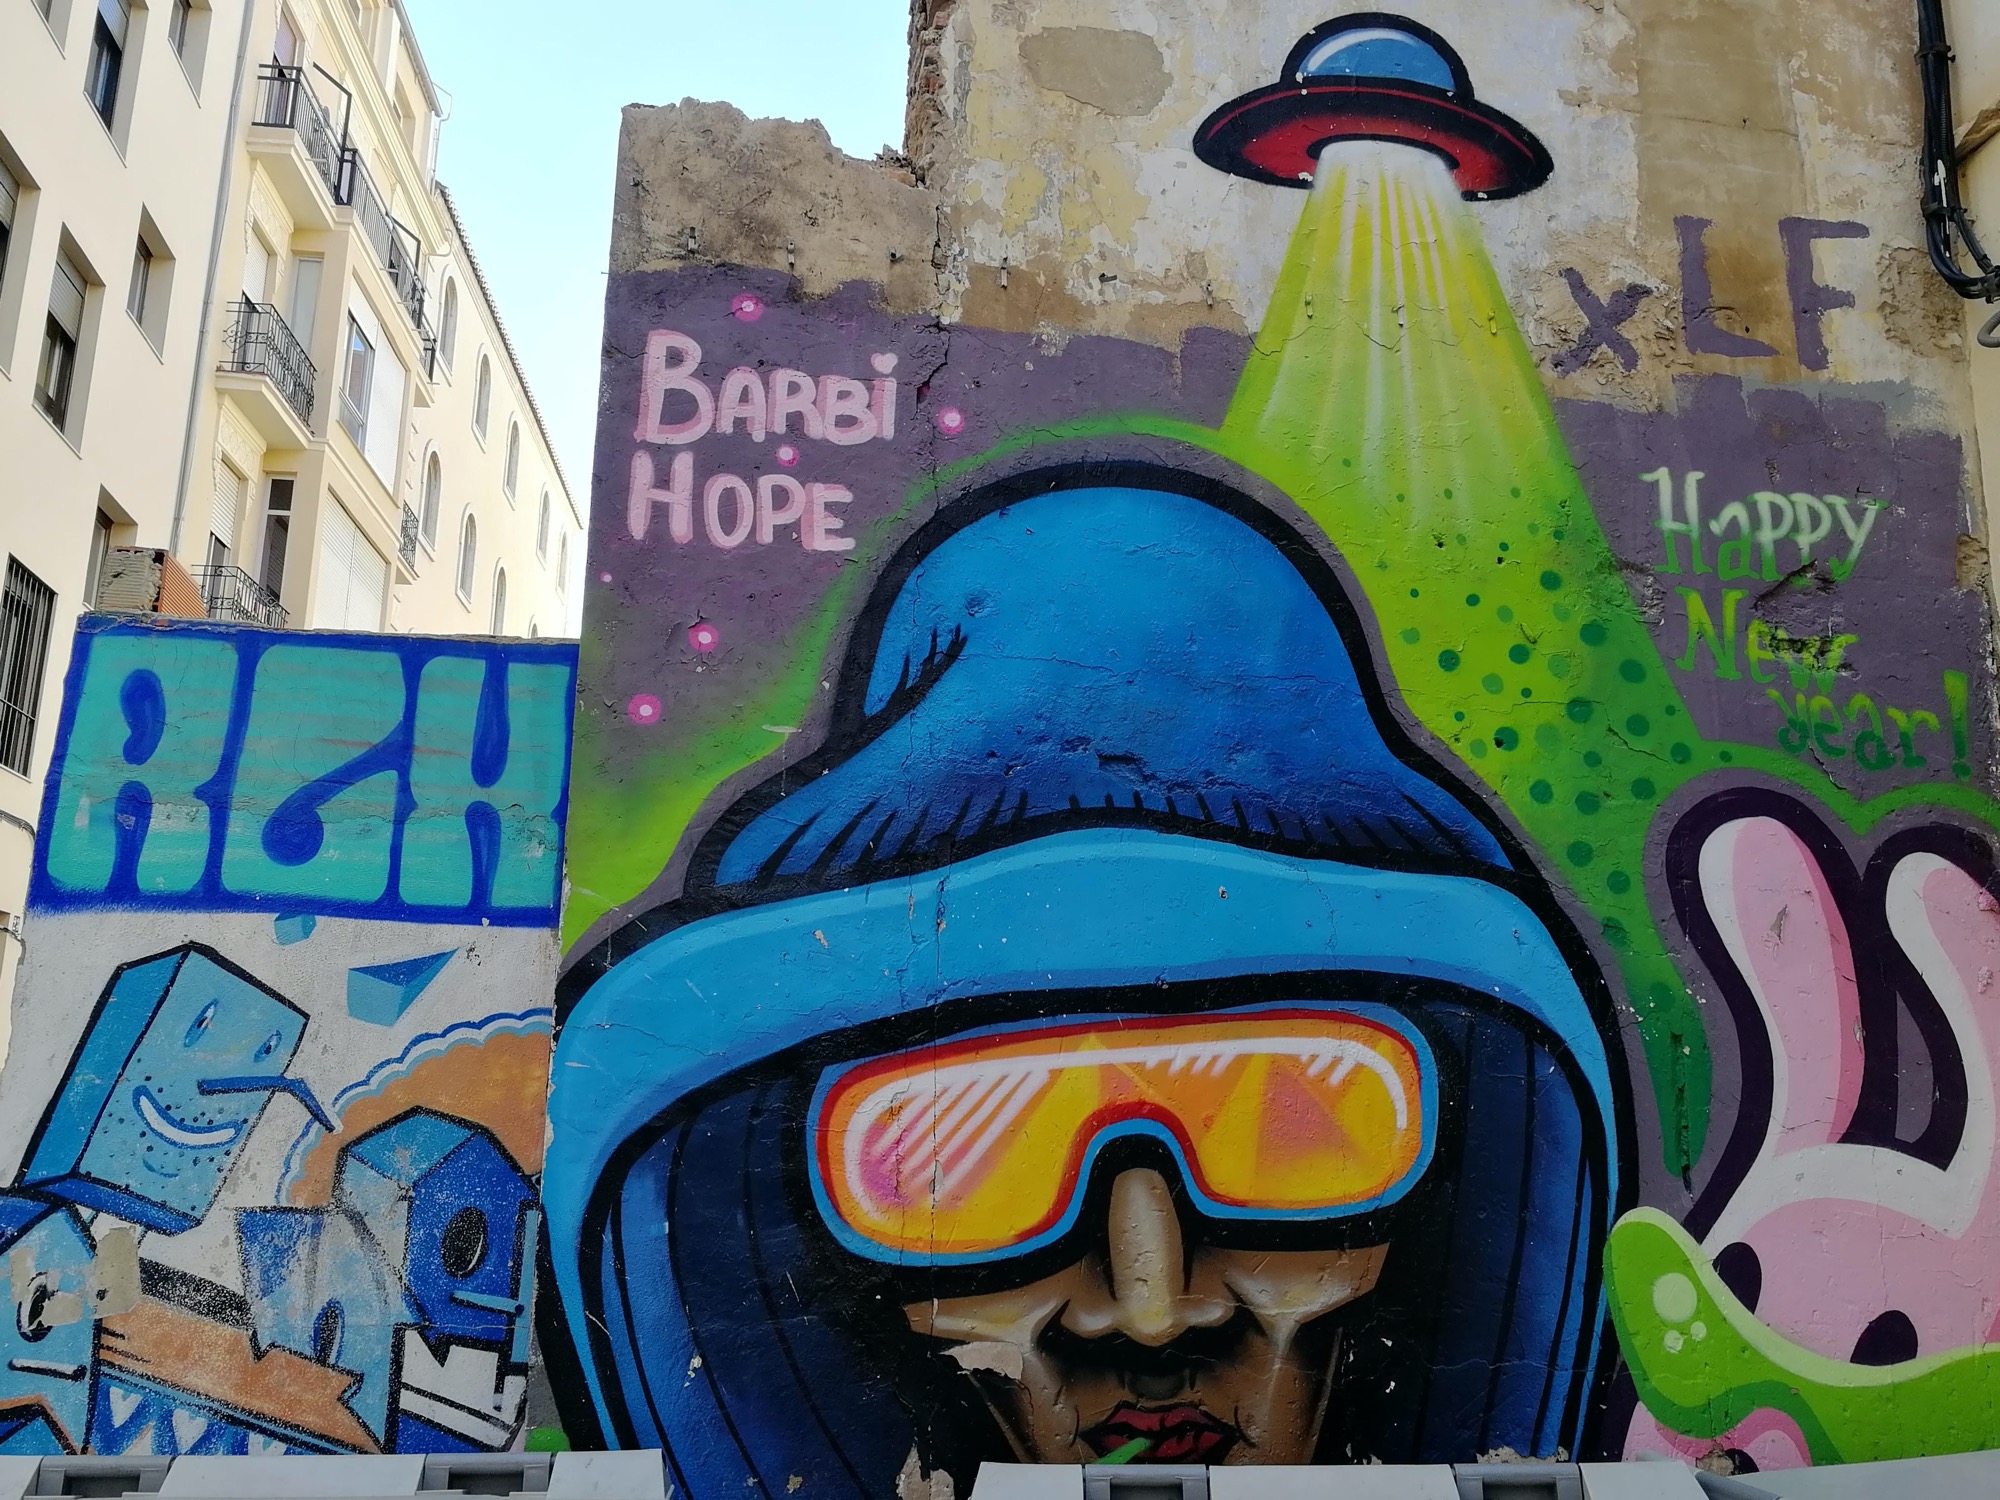 Graffiti 3733  by the artist Barbi captured by Rabot in València Spain